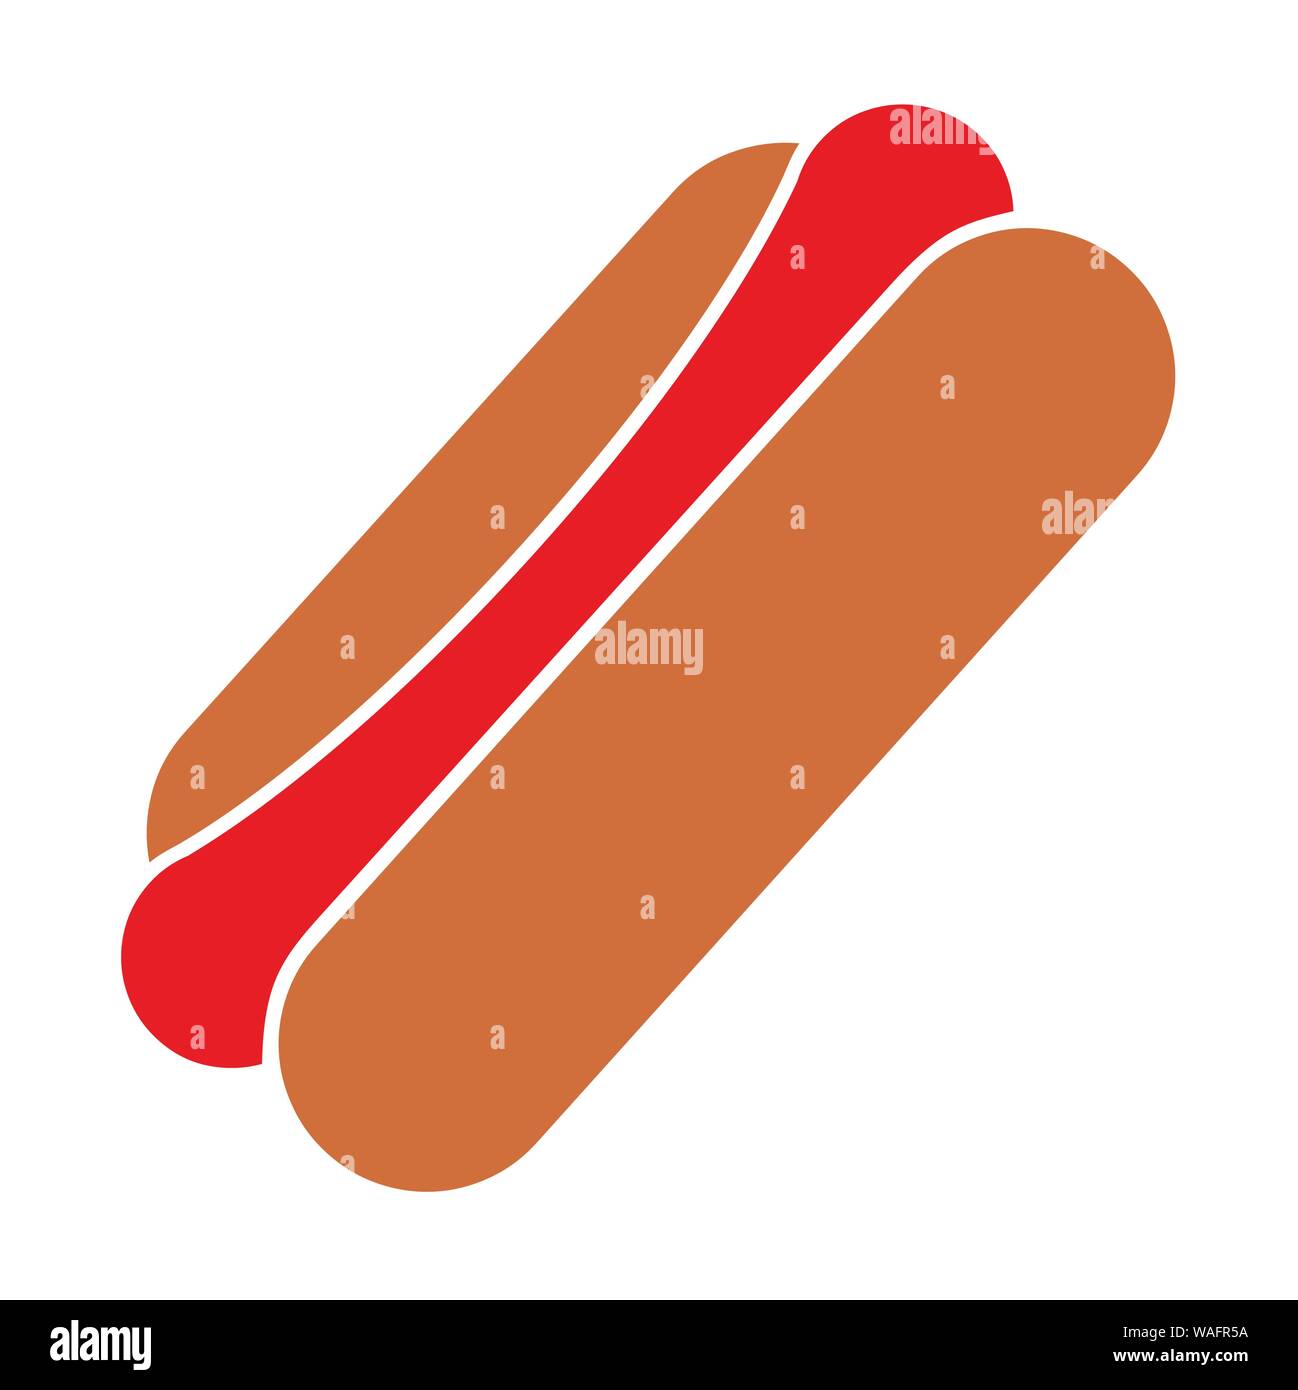 A colorful Hot dog icon on white background Stock Vector